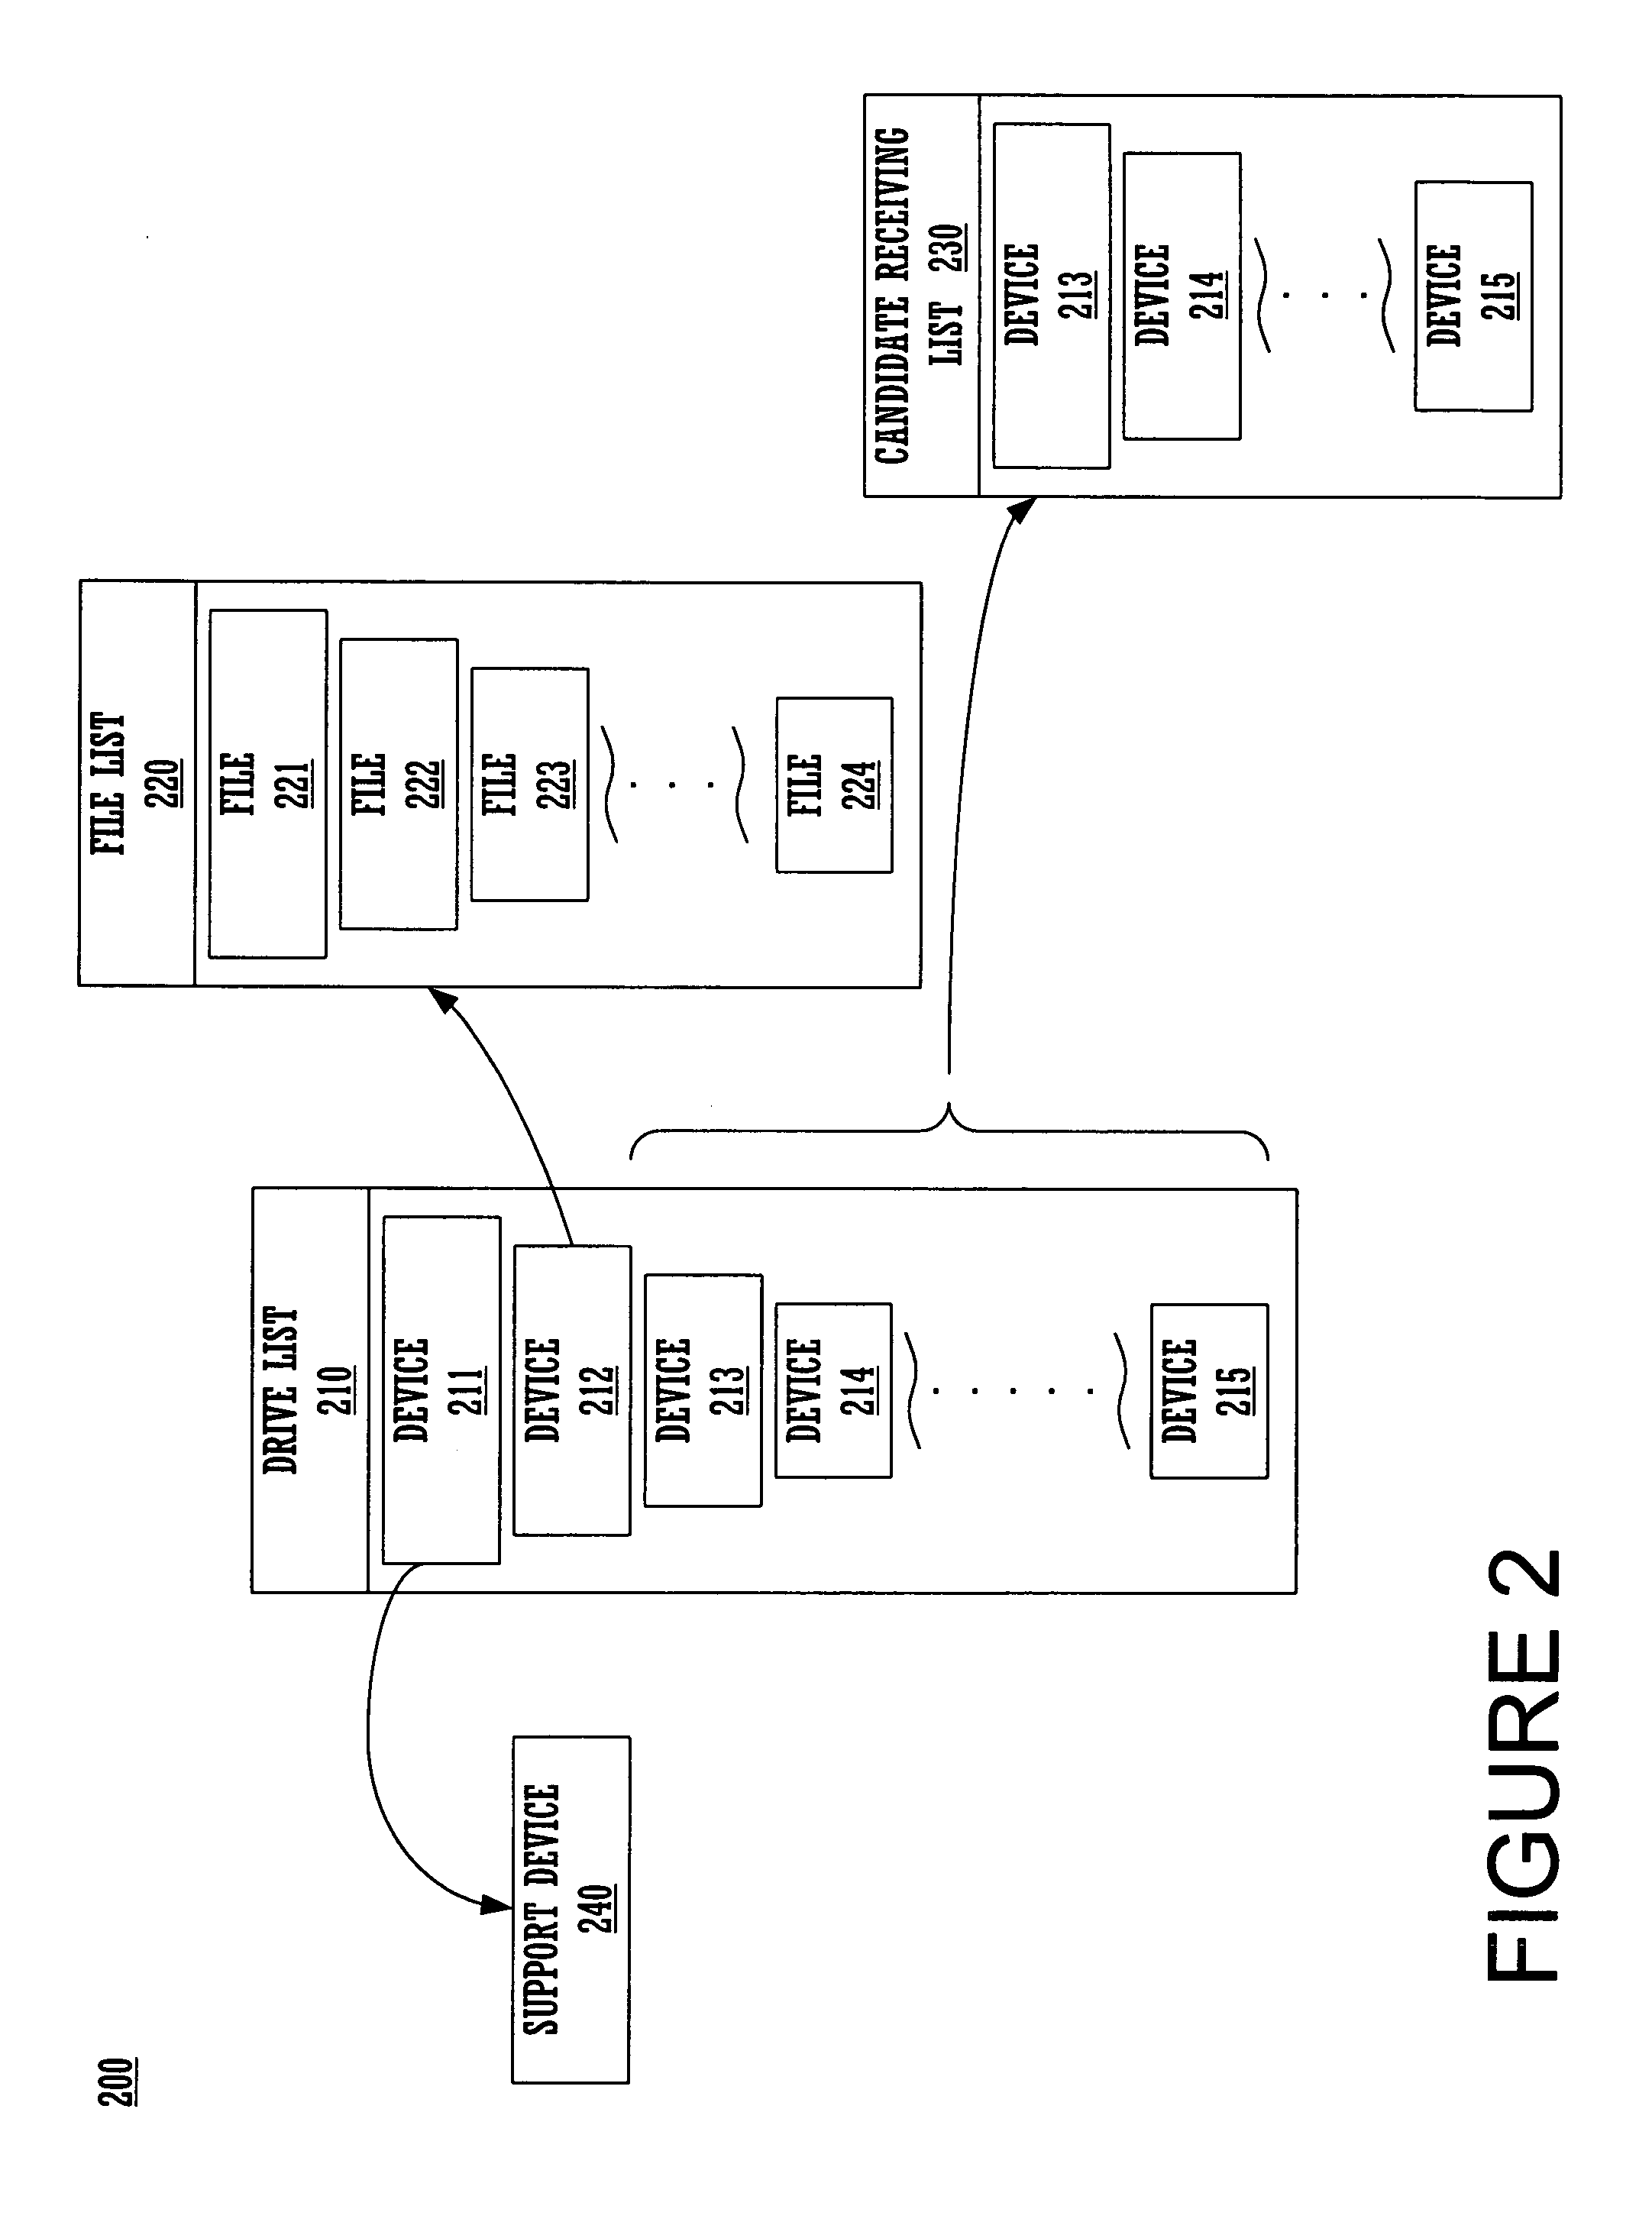 Method and system for archiving and compacting data in a data storage array